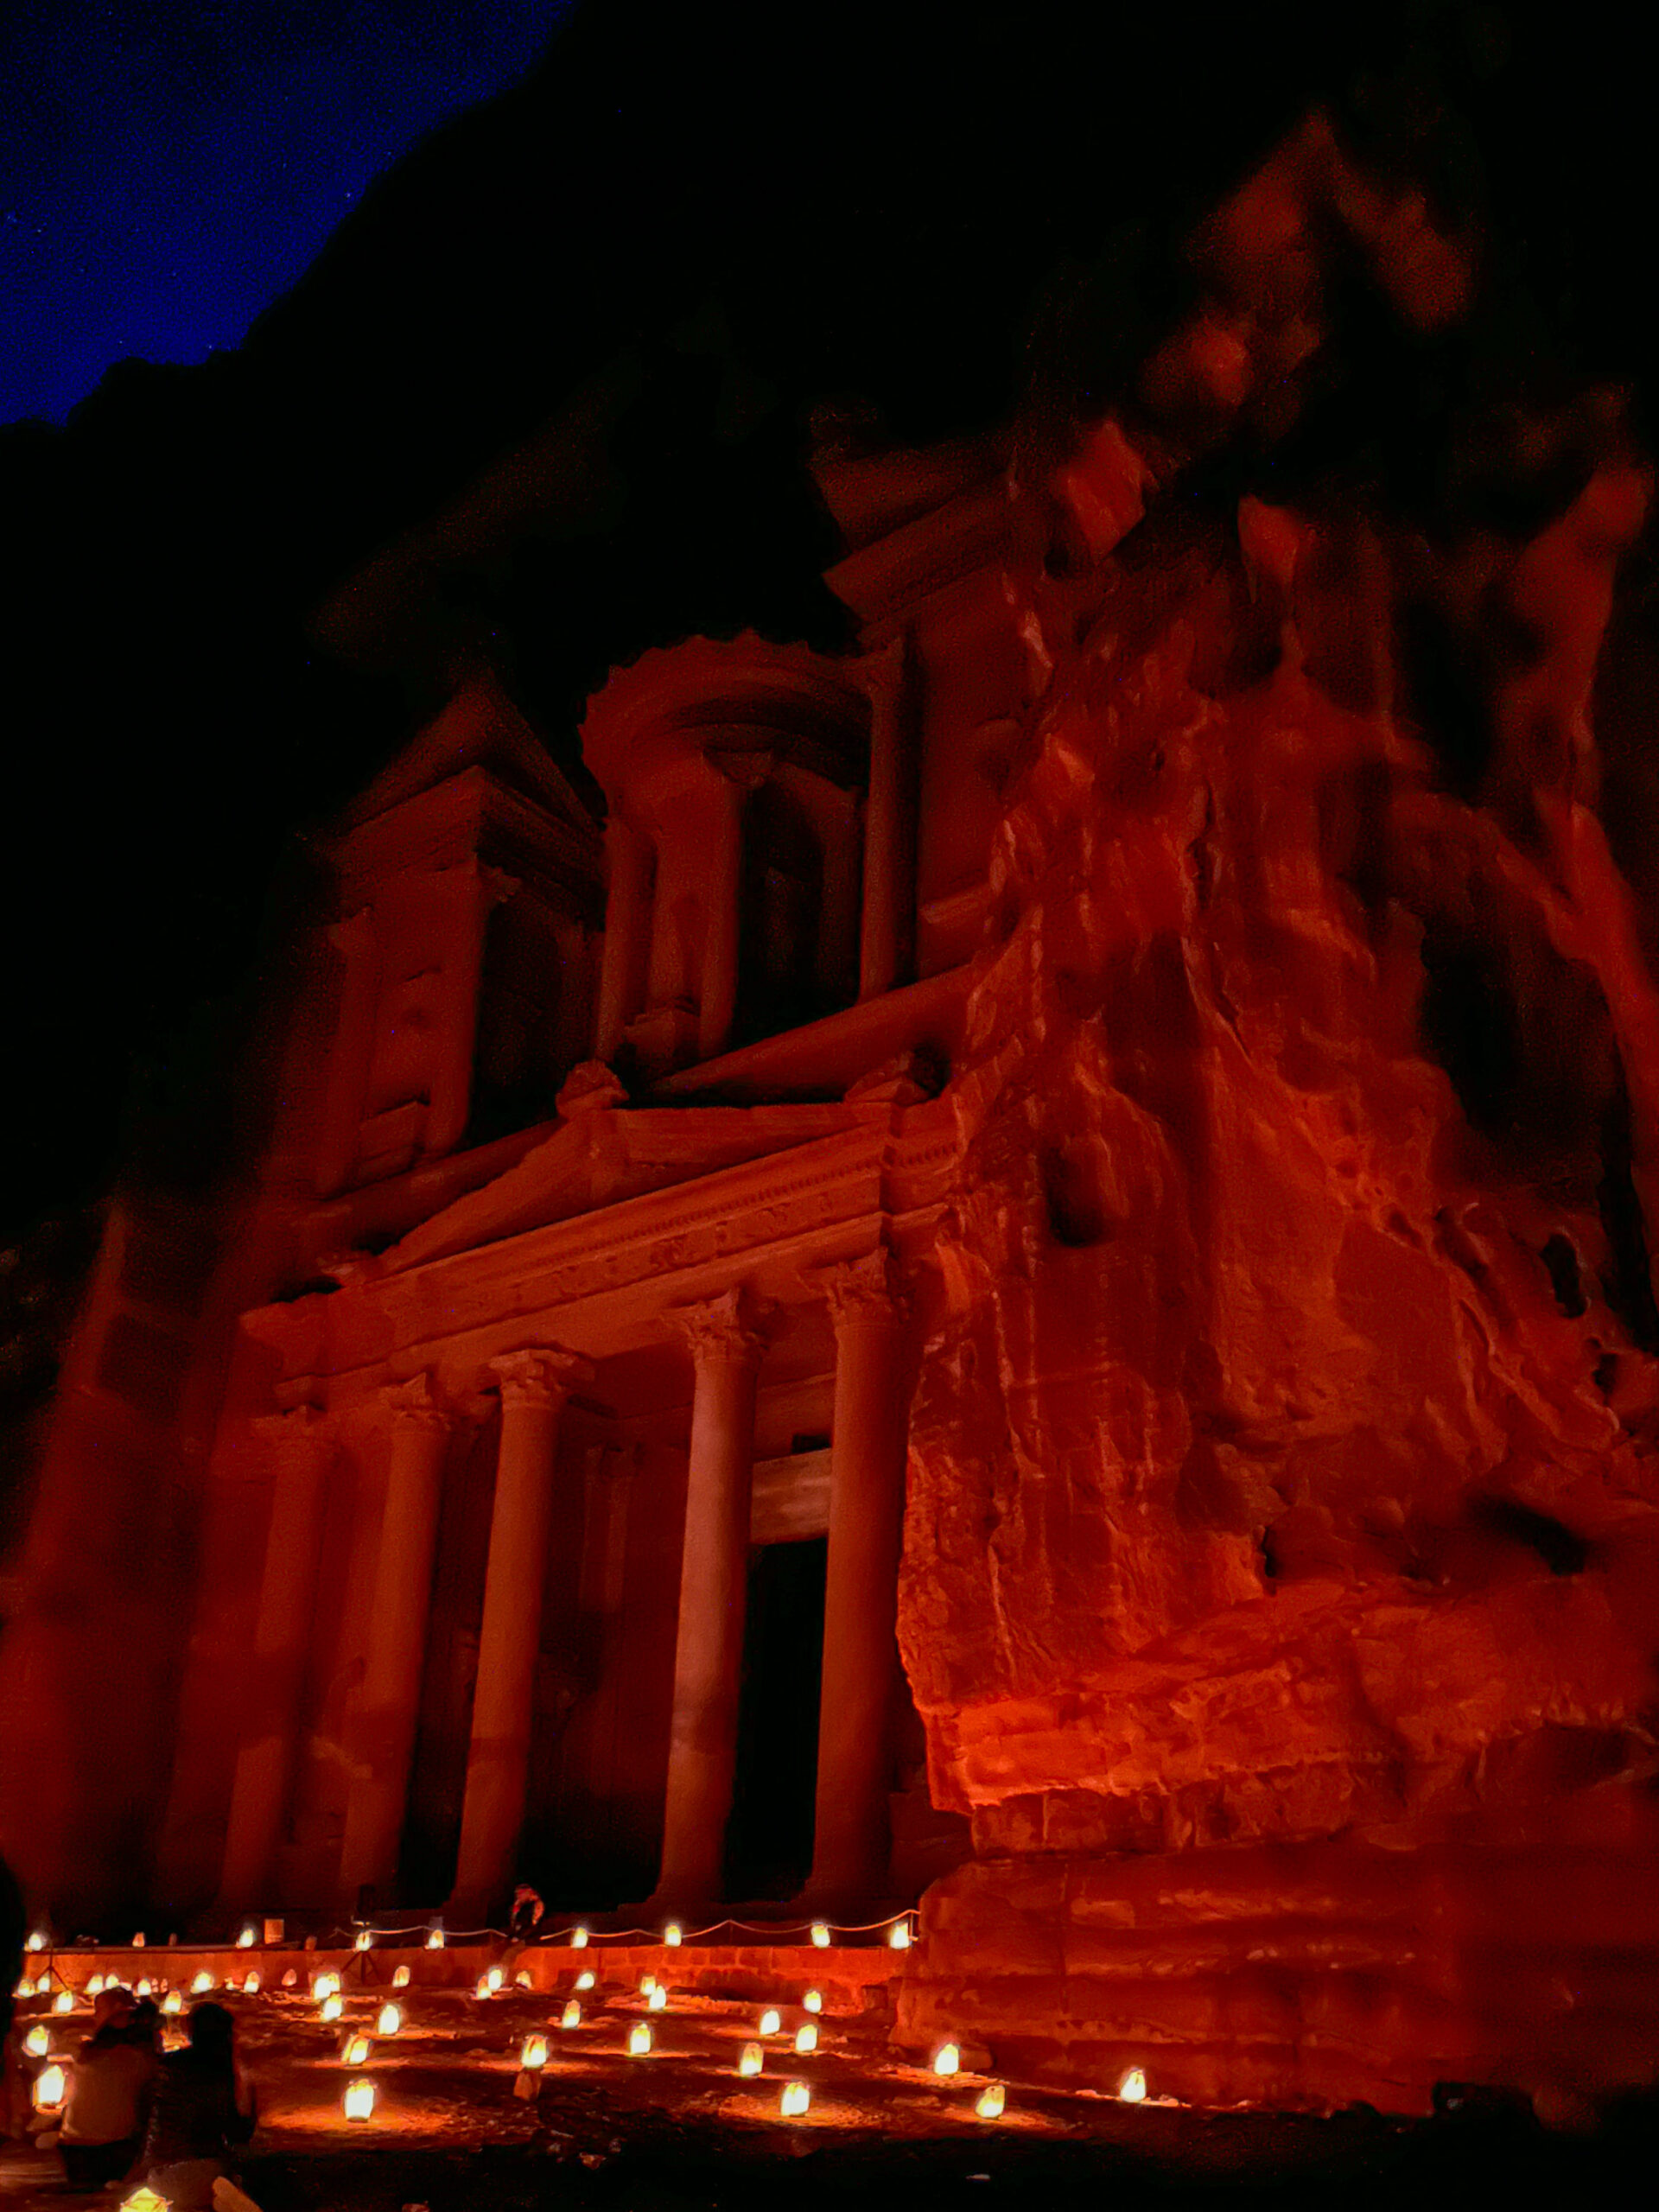 The night show at Petra By Night had a musician and a colorful light show on The Treasury. 